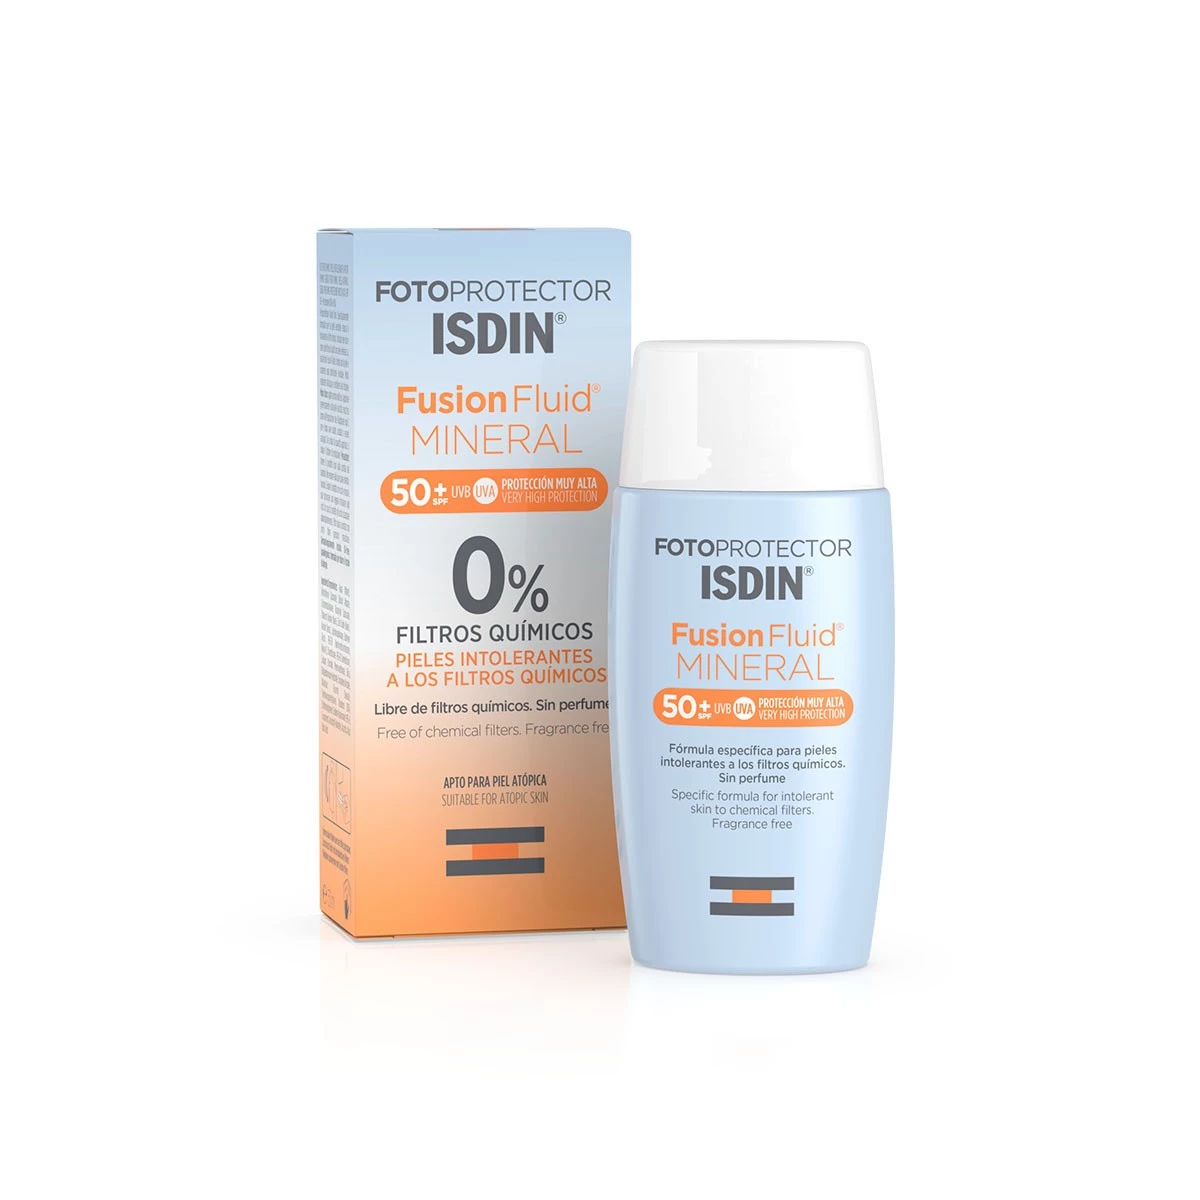 Fotoprotector Isdin Fusion Fluid Mineral SPF50+, 50ml